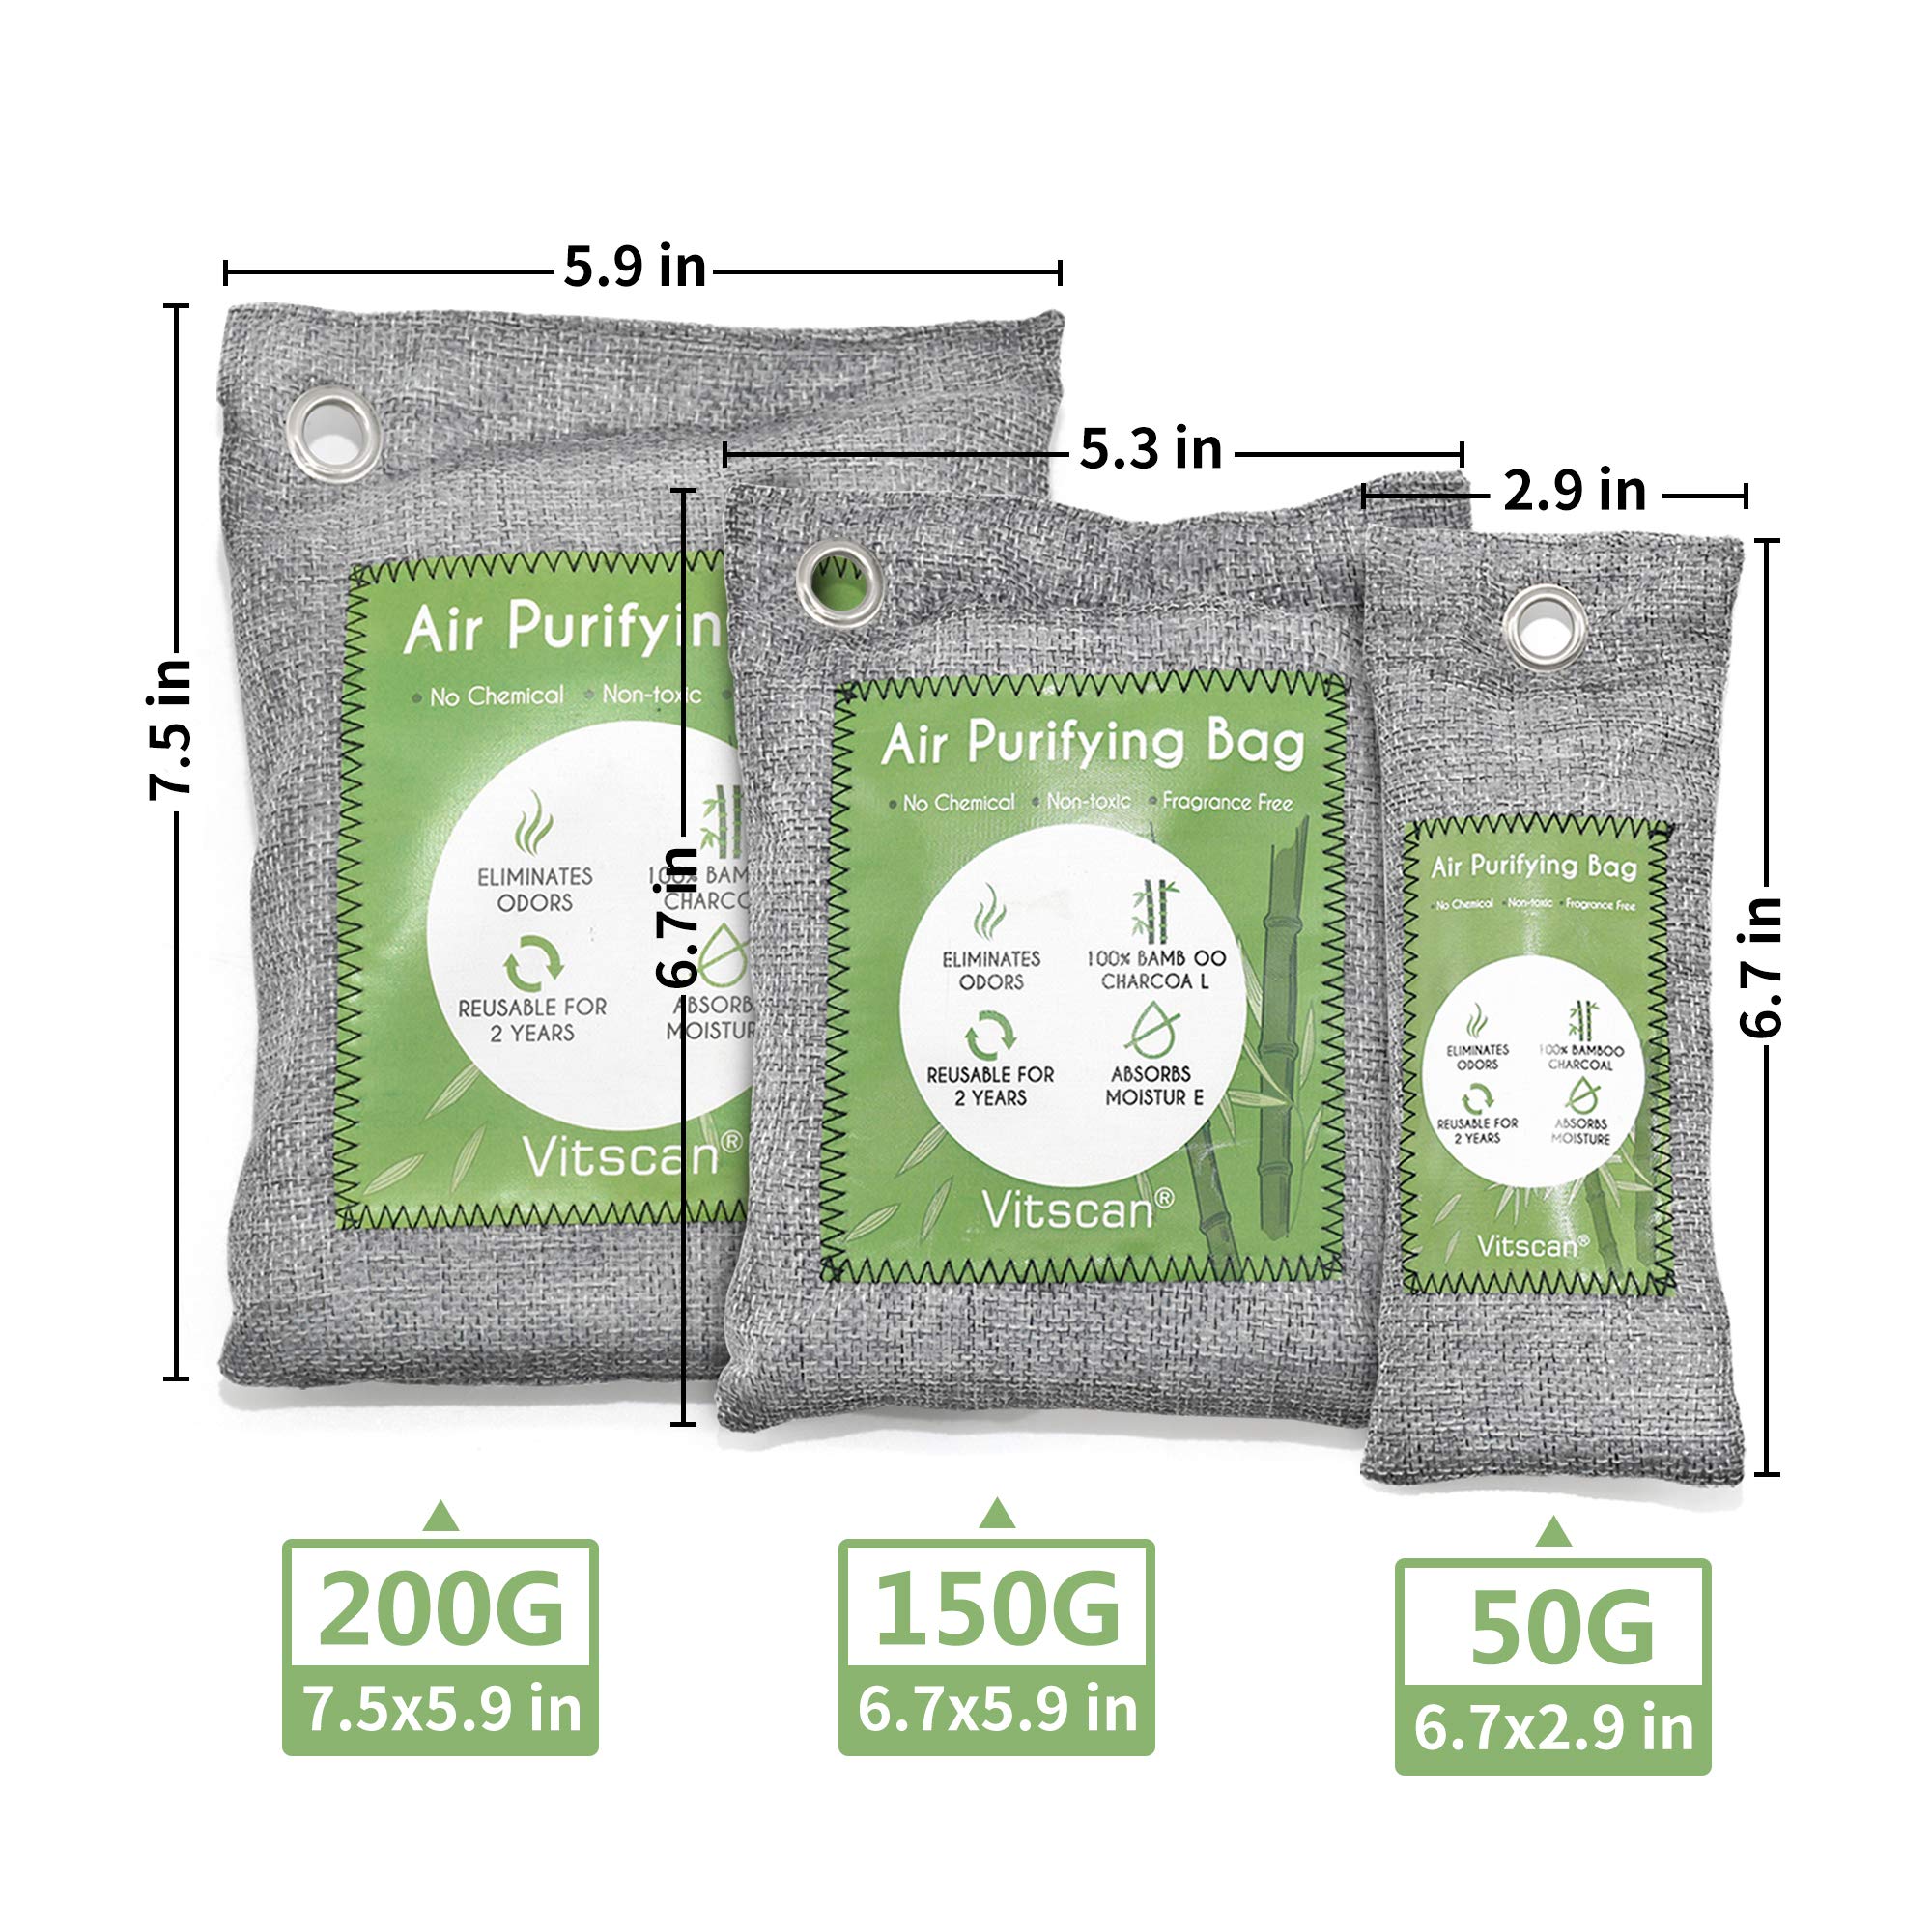 12 Pack Bamboo Charcoal Air Purifying Bag, Activated Charcoal Bags Odor Absorber, Moisture Absorber, Natural Car Air Freshener, Shoe Deodorizer, Odor Eliminators For Home, Pet, Closet (6x50g, 6x150g)